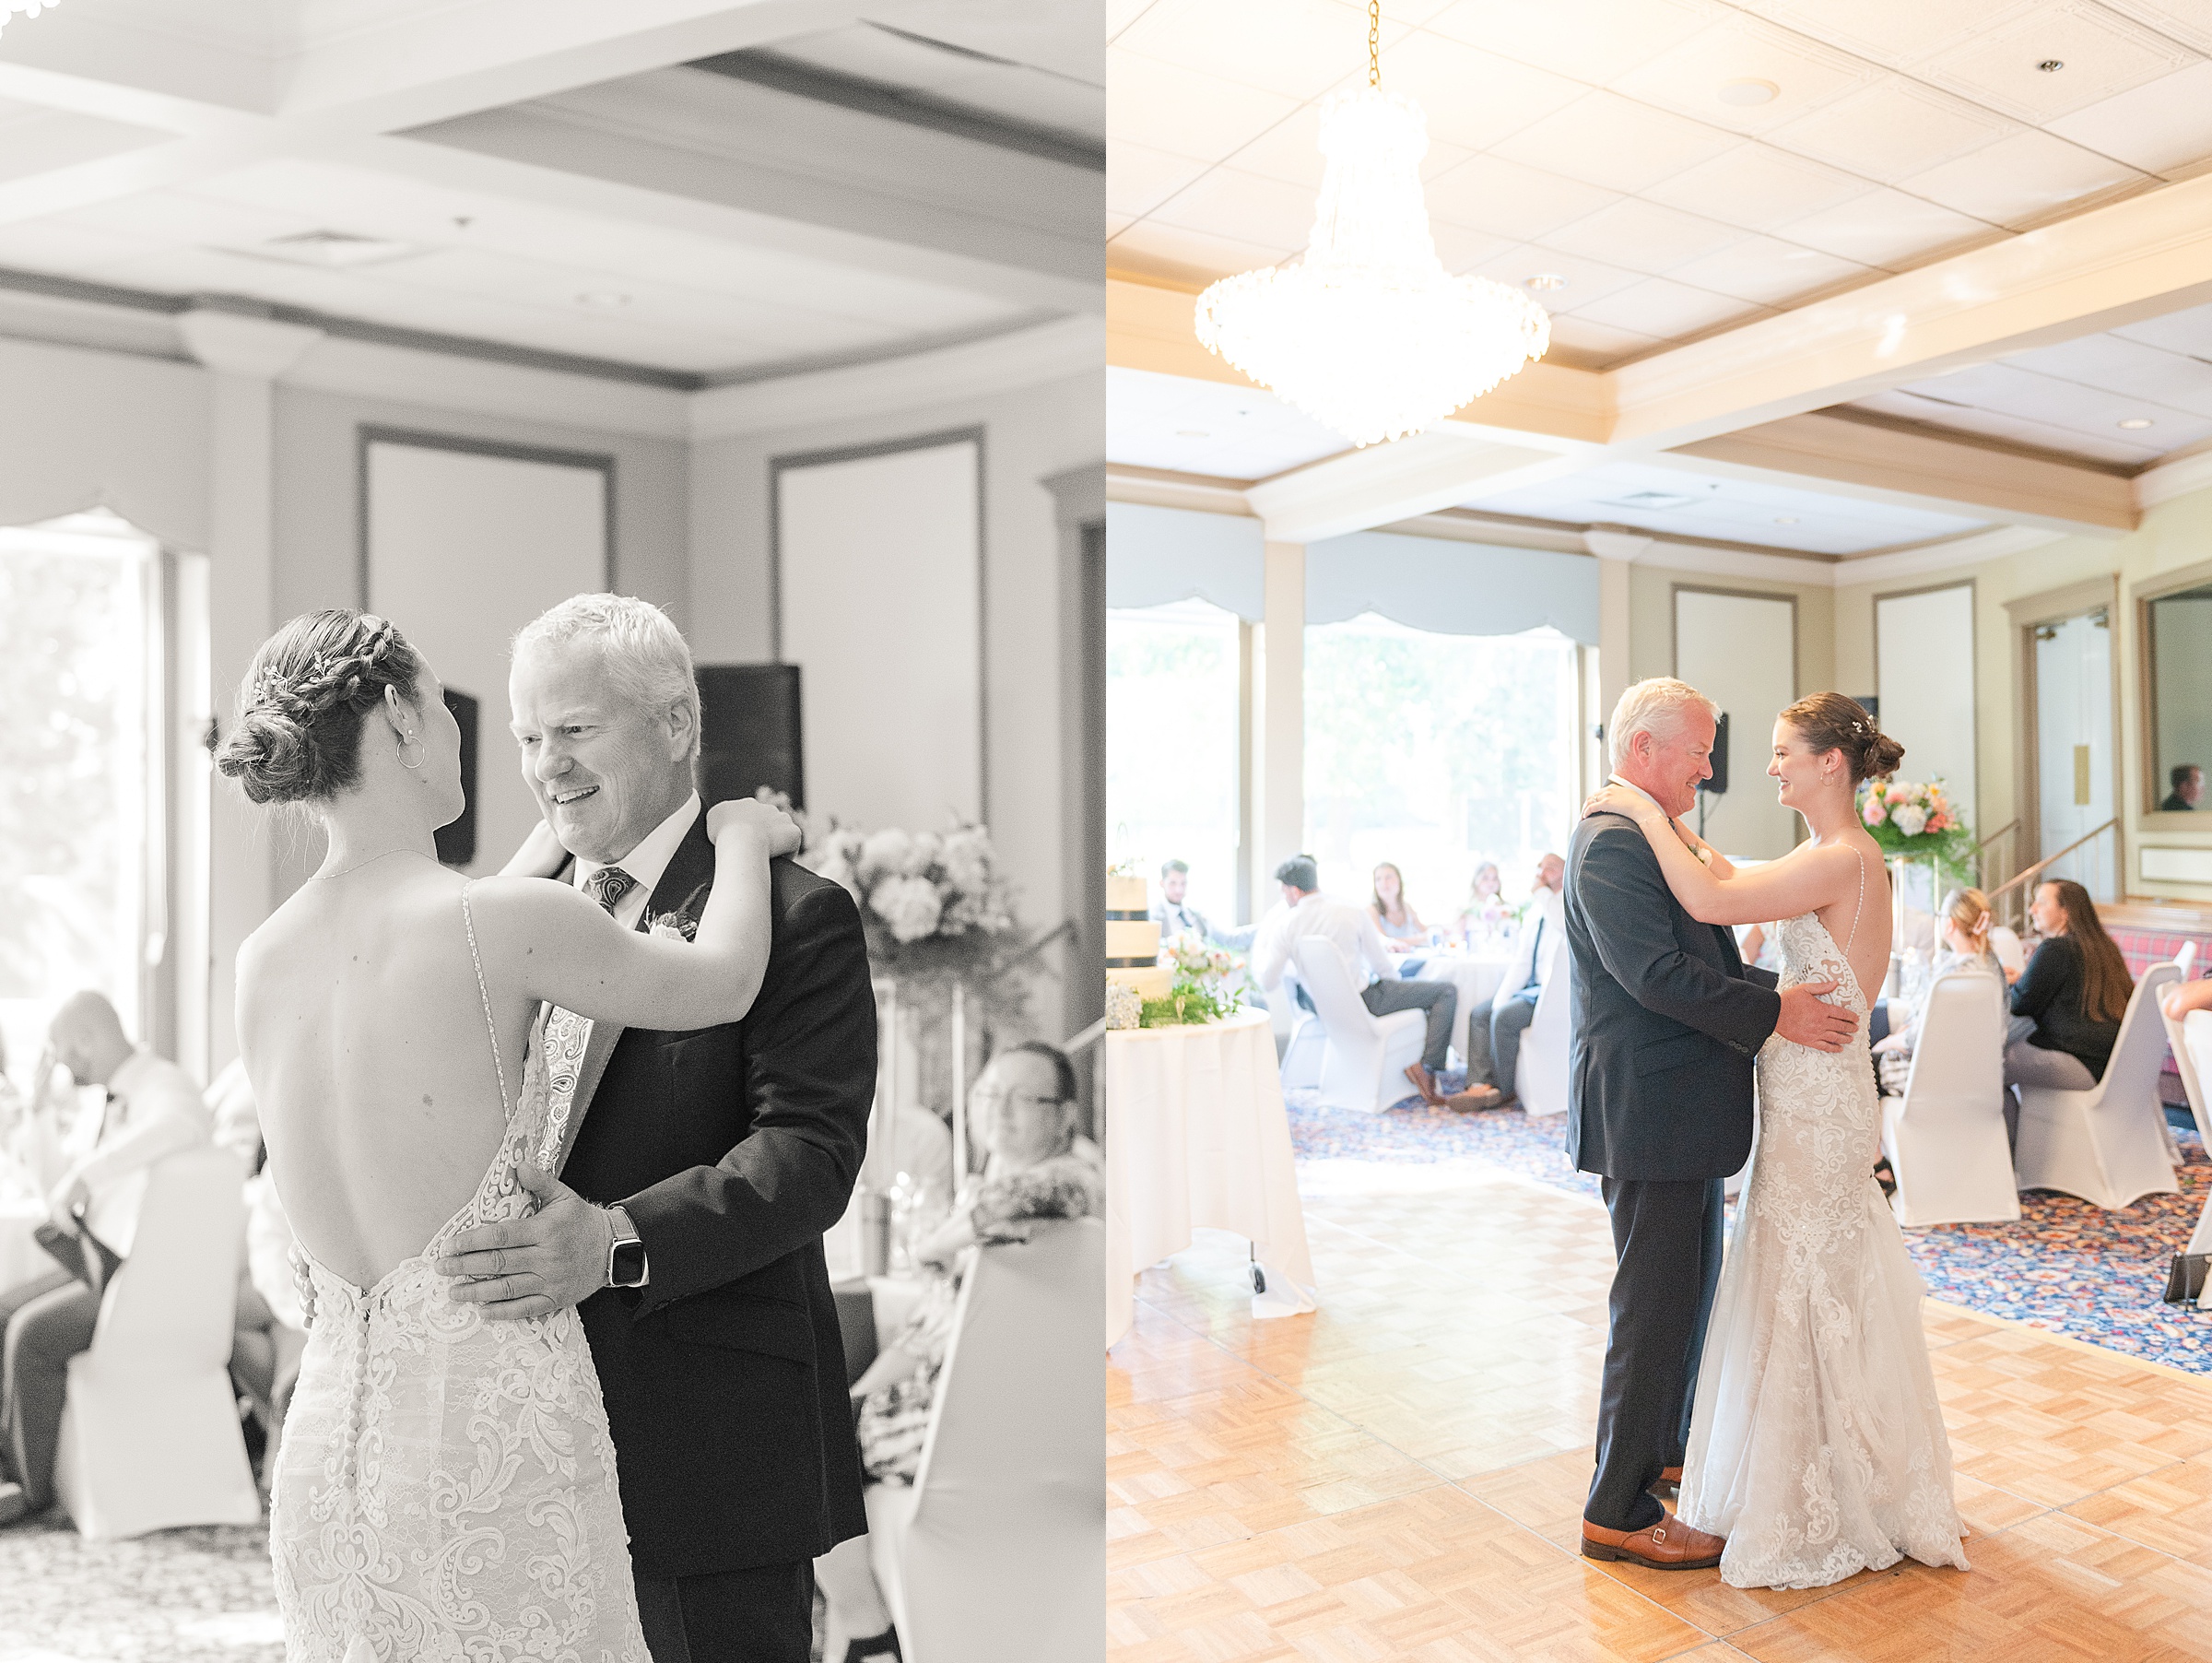 Father Daughter Dance at Reception | Anderson Country Club Wedding, Indiana